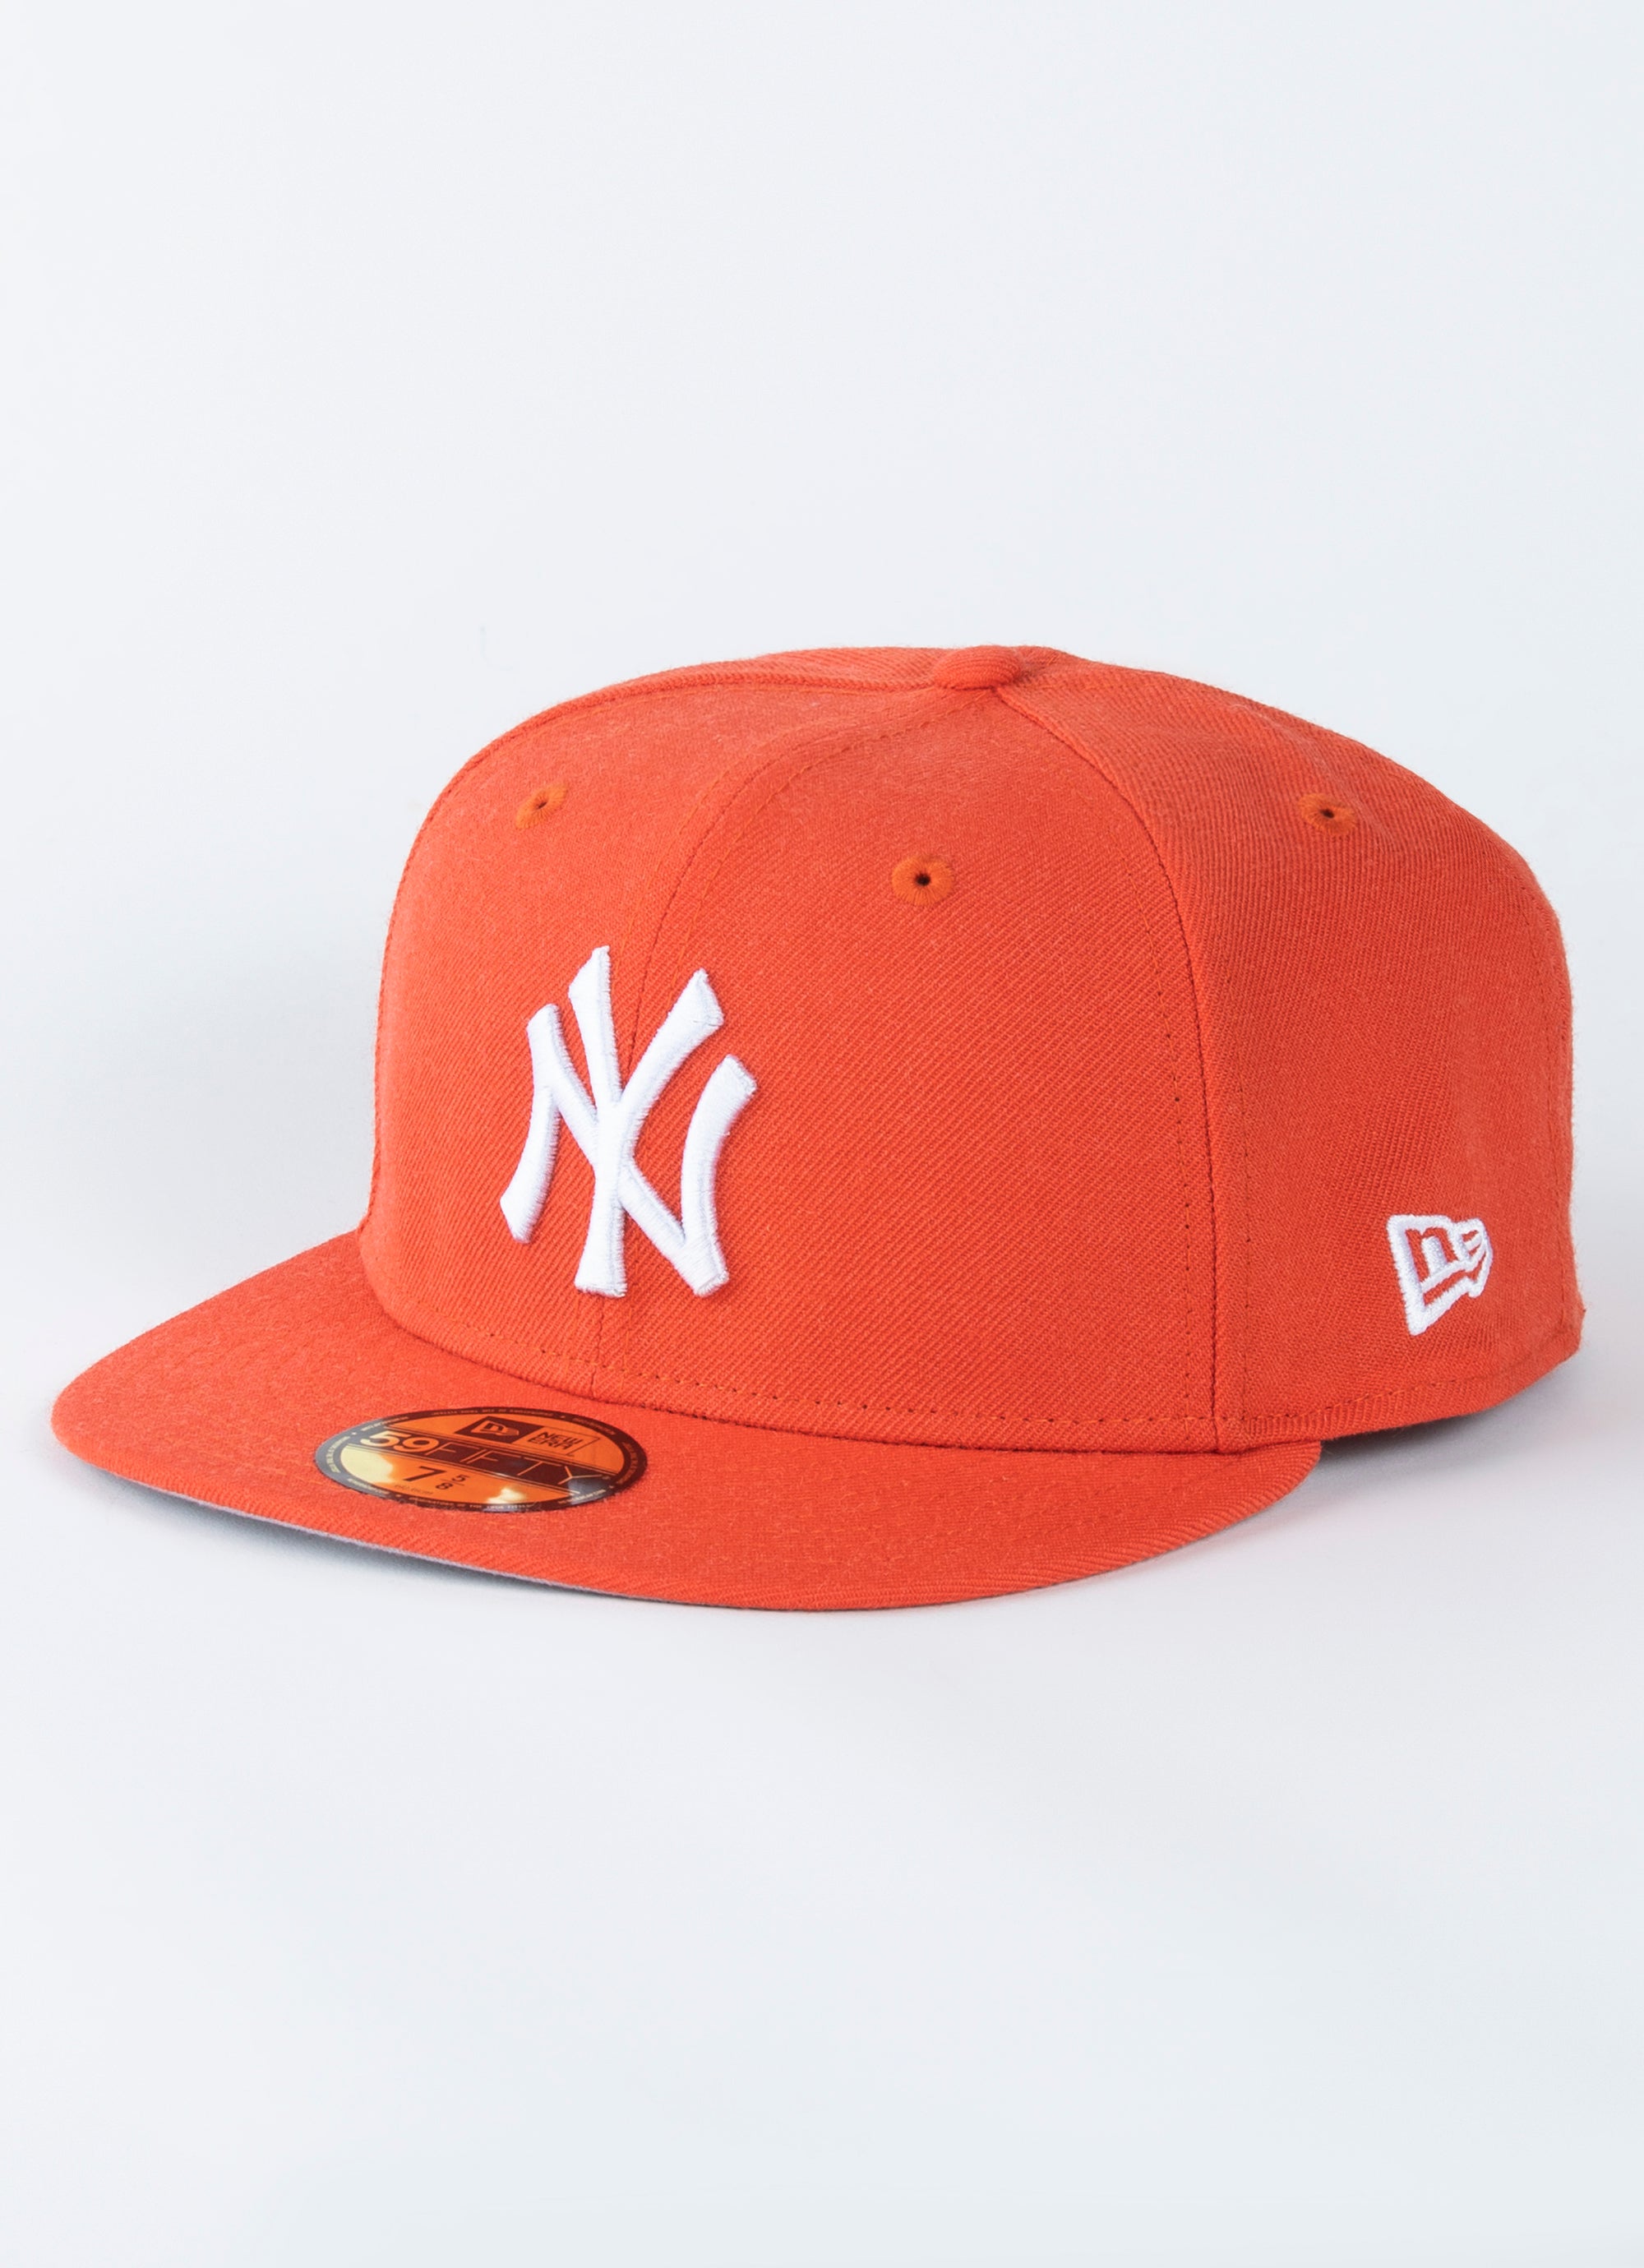 47 Brand Relaxed Fit Cap  MLB New York Yankees Bone Beige  Amazonca  Sports  Outdoors